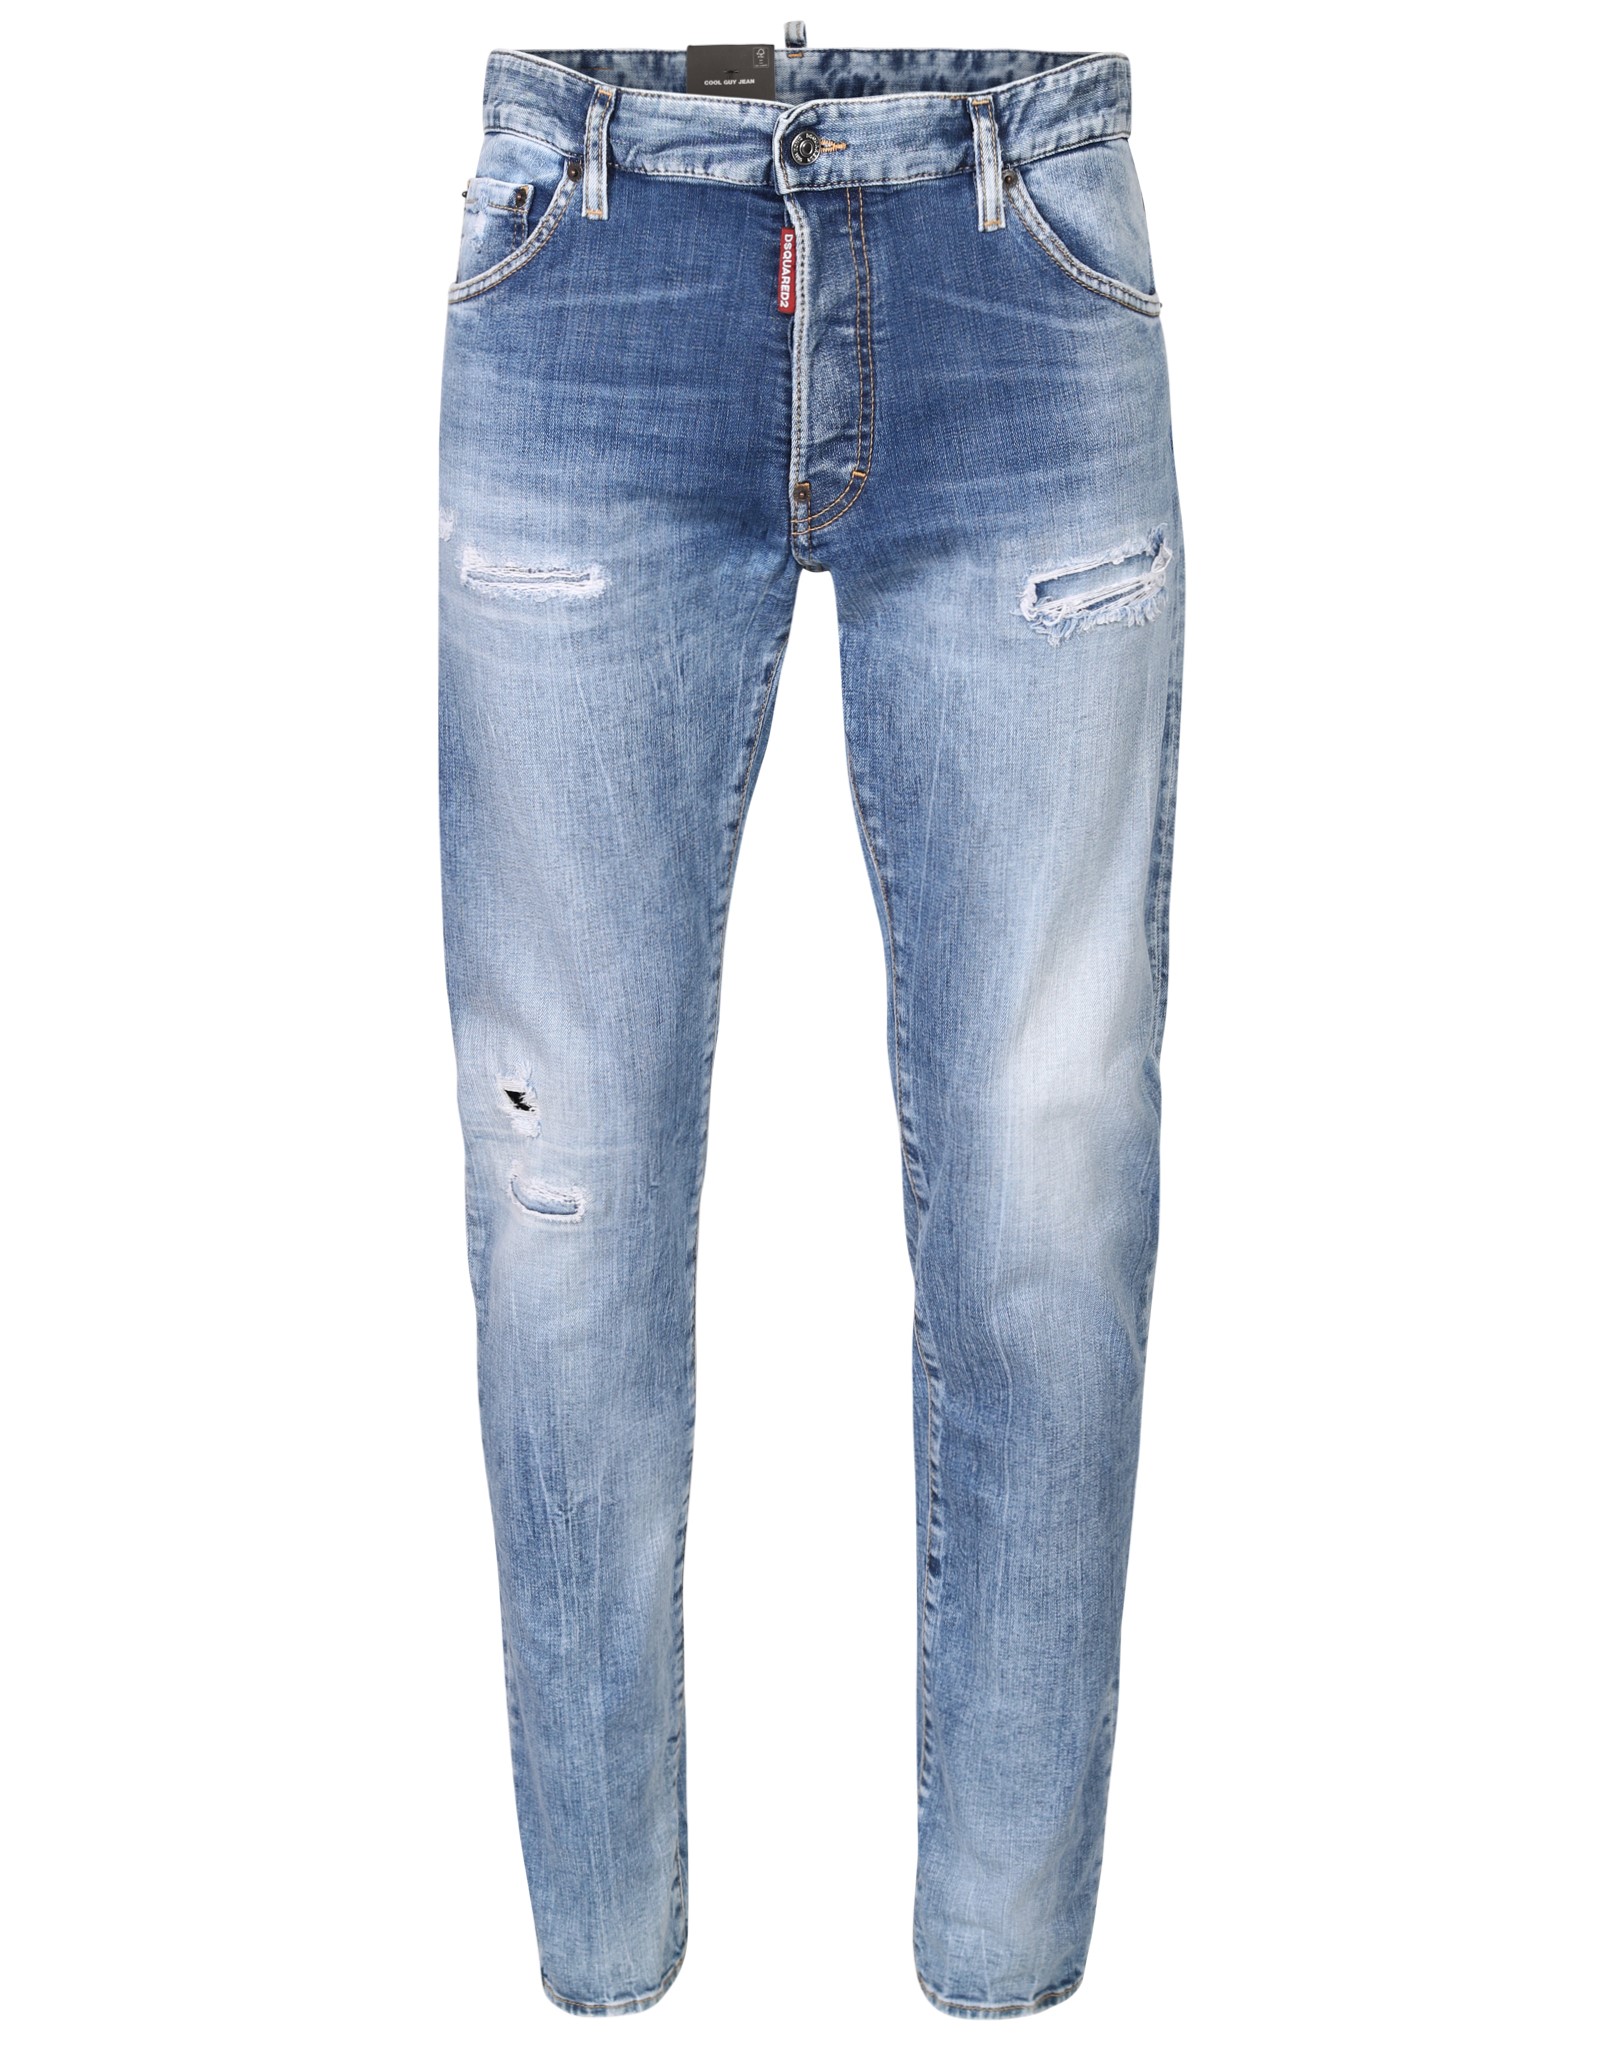 DSQUARED2 Cool Guy Jeans in Light Blue Washing